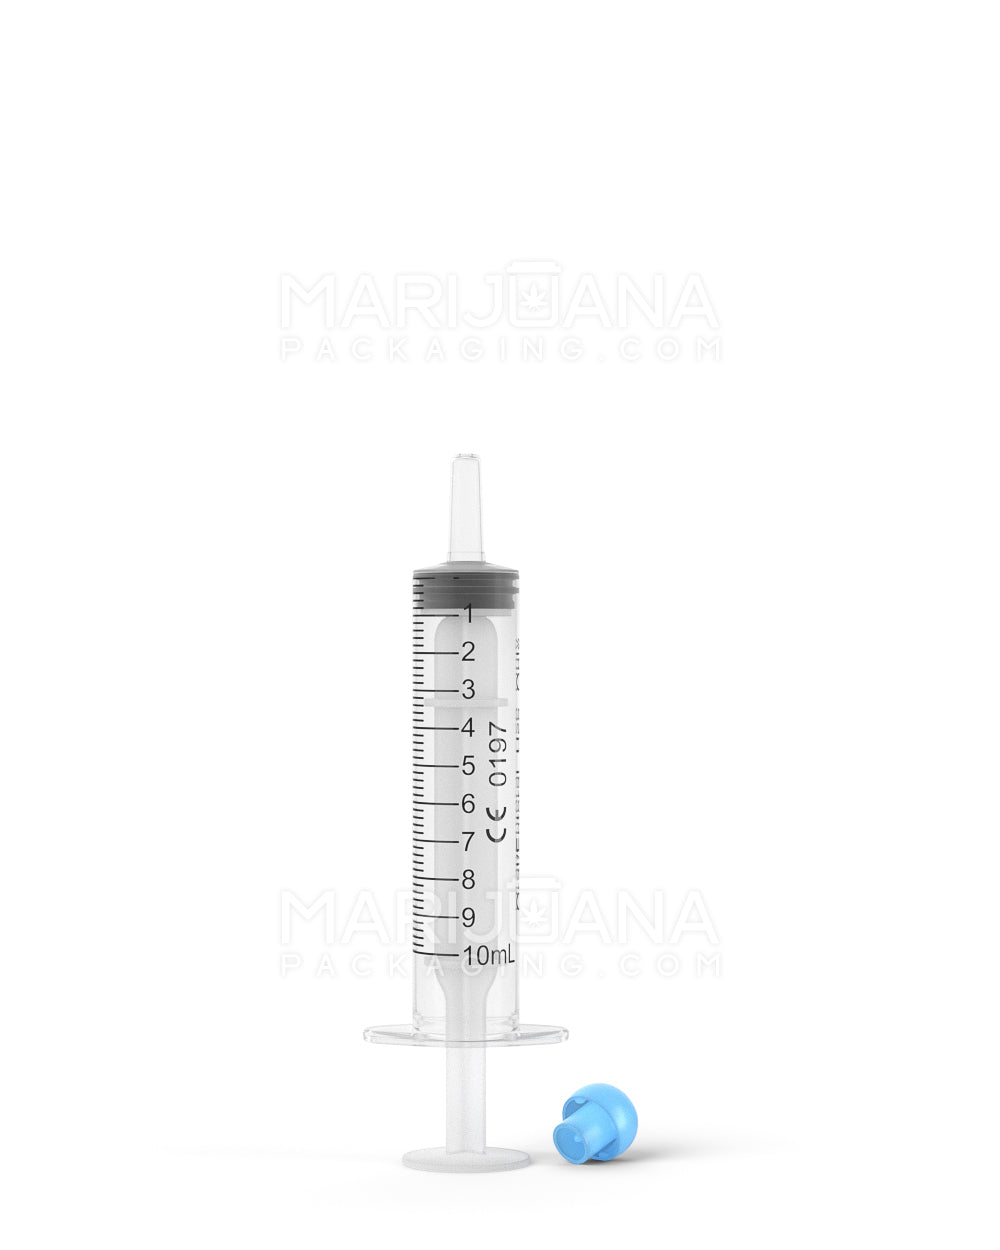 Plastic Oral Concentrate Syringes | 10mL - 1mL Increments - 100 Count - 9